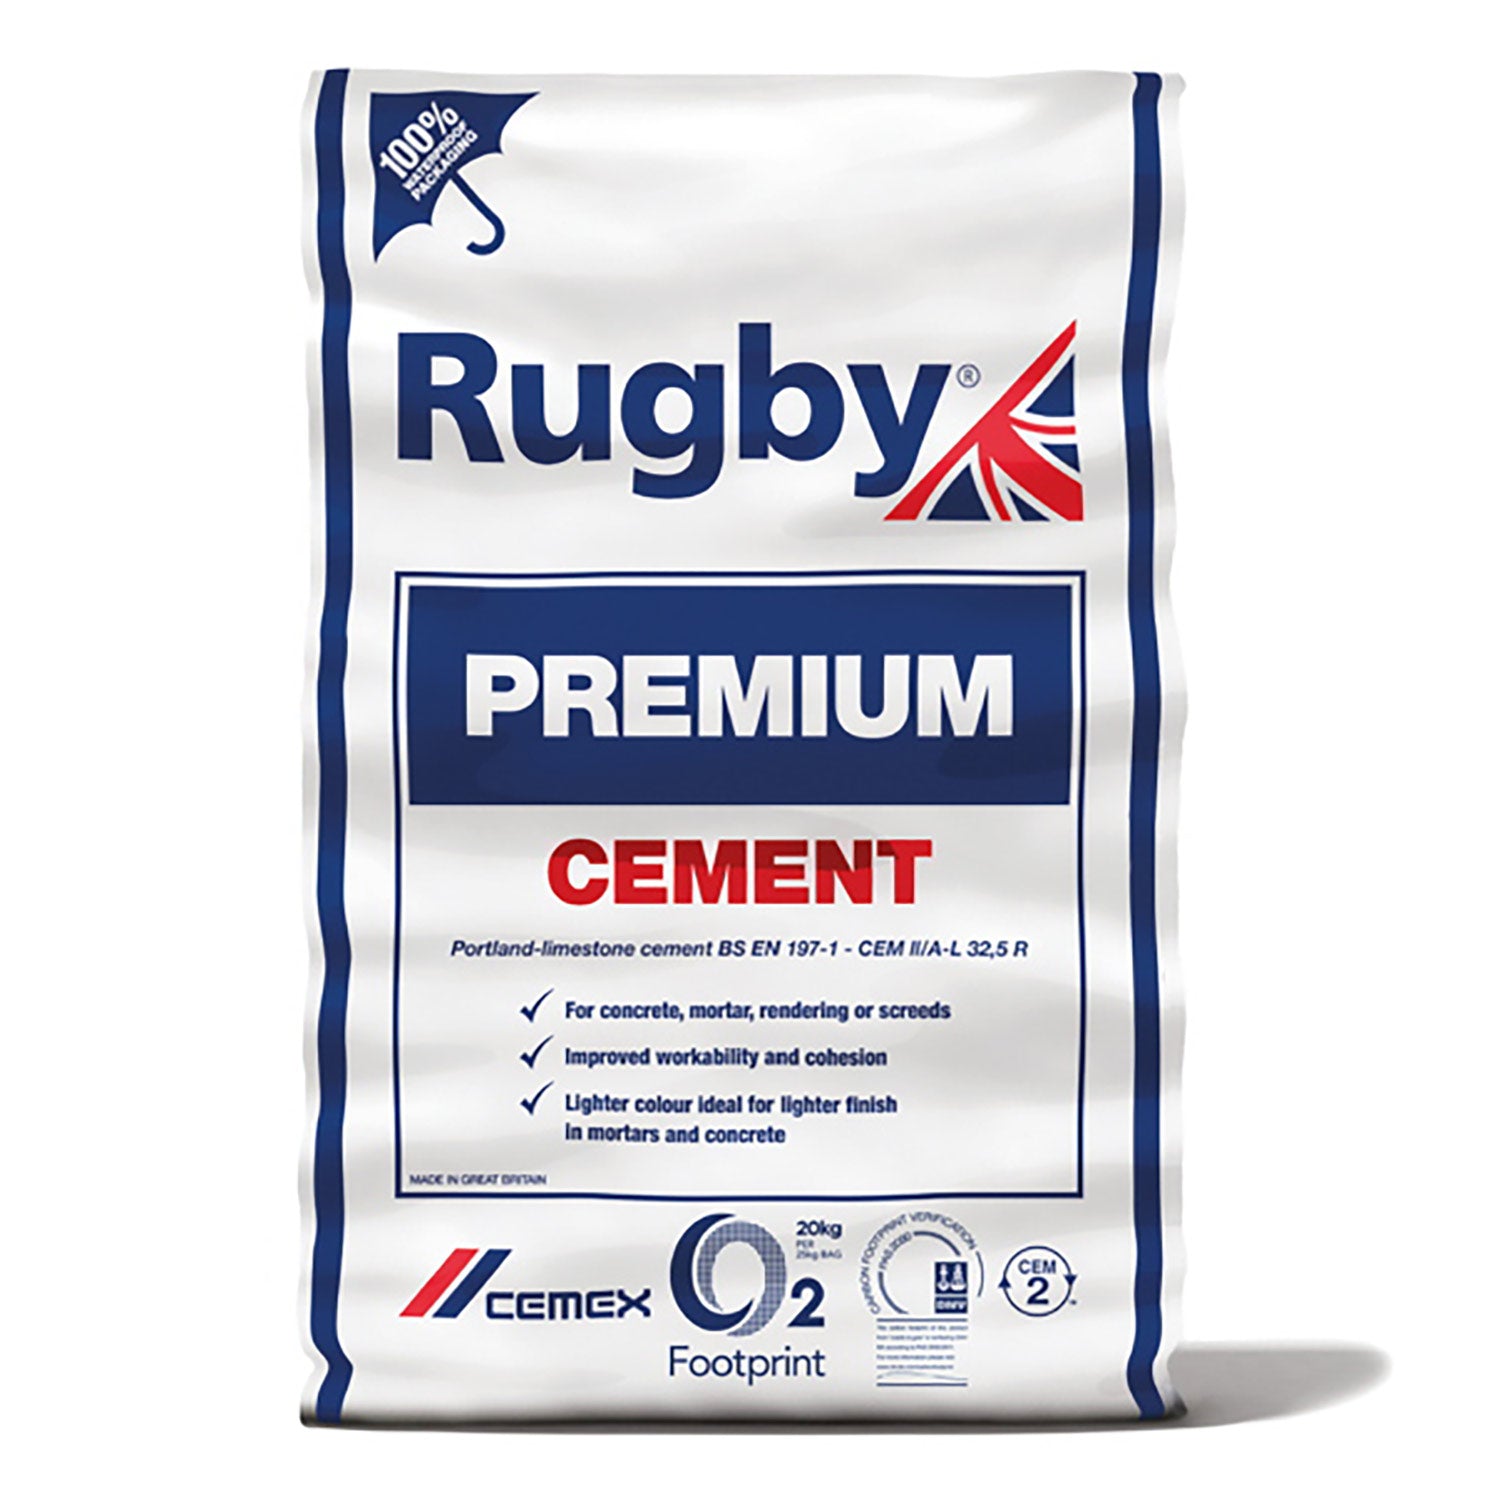 Rugby Cement 25kg